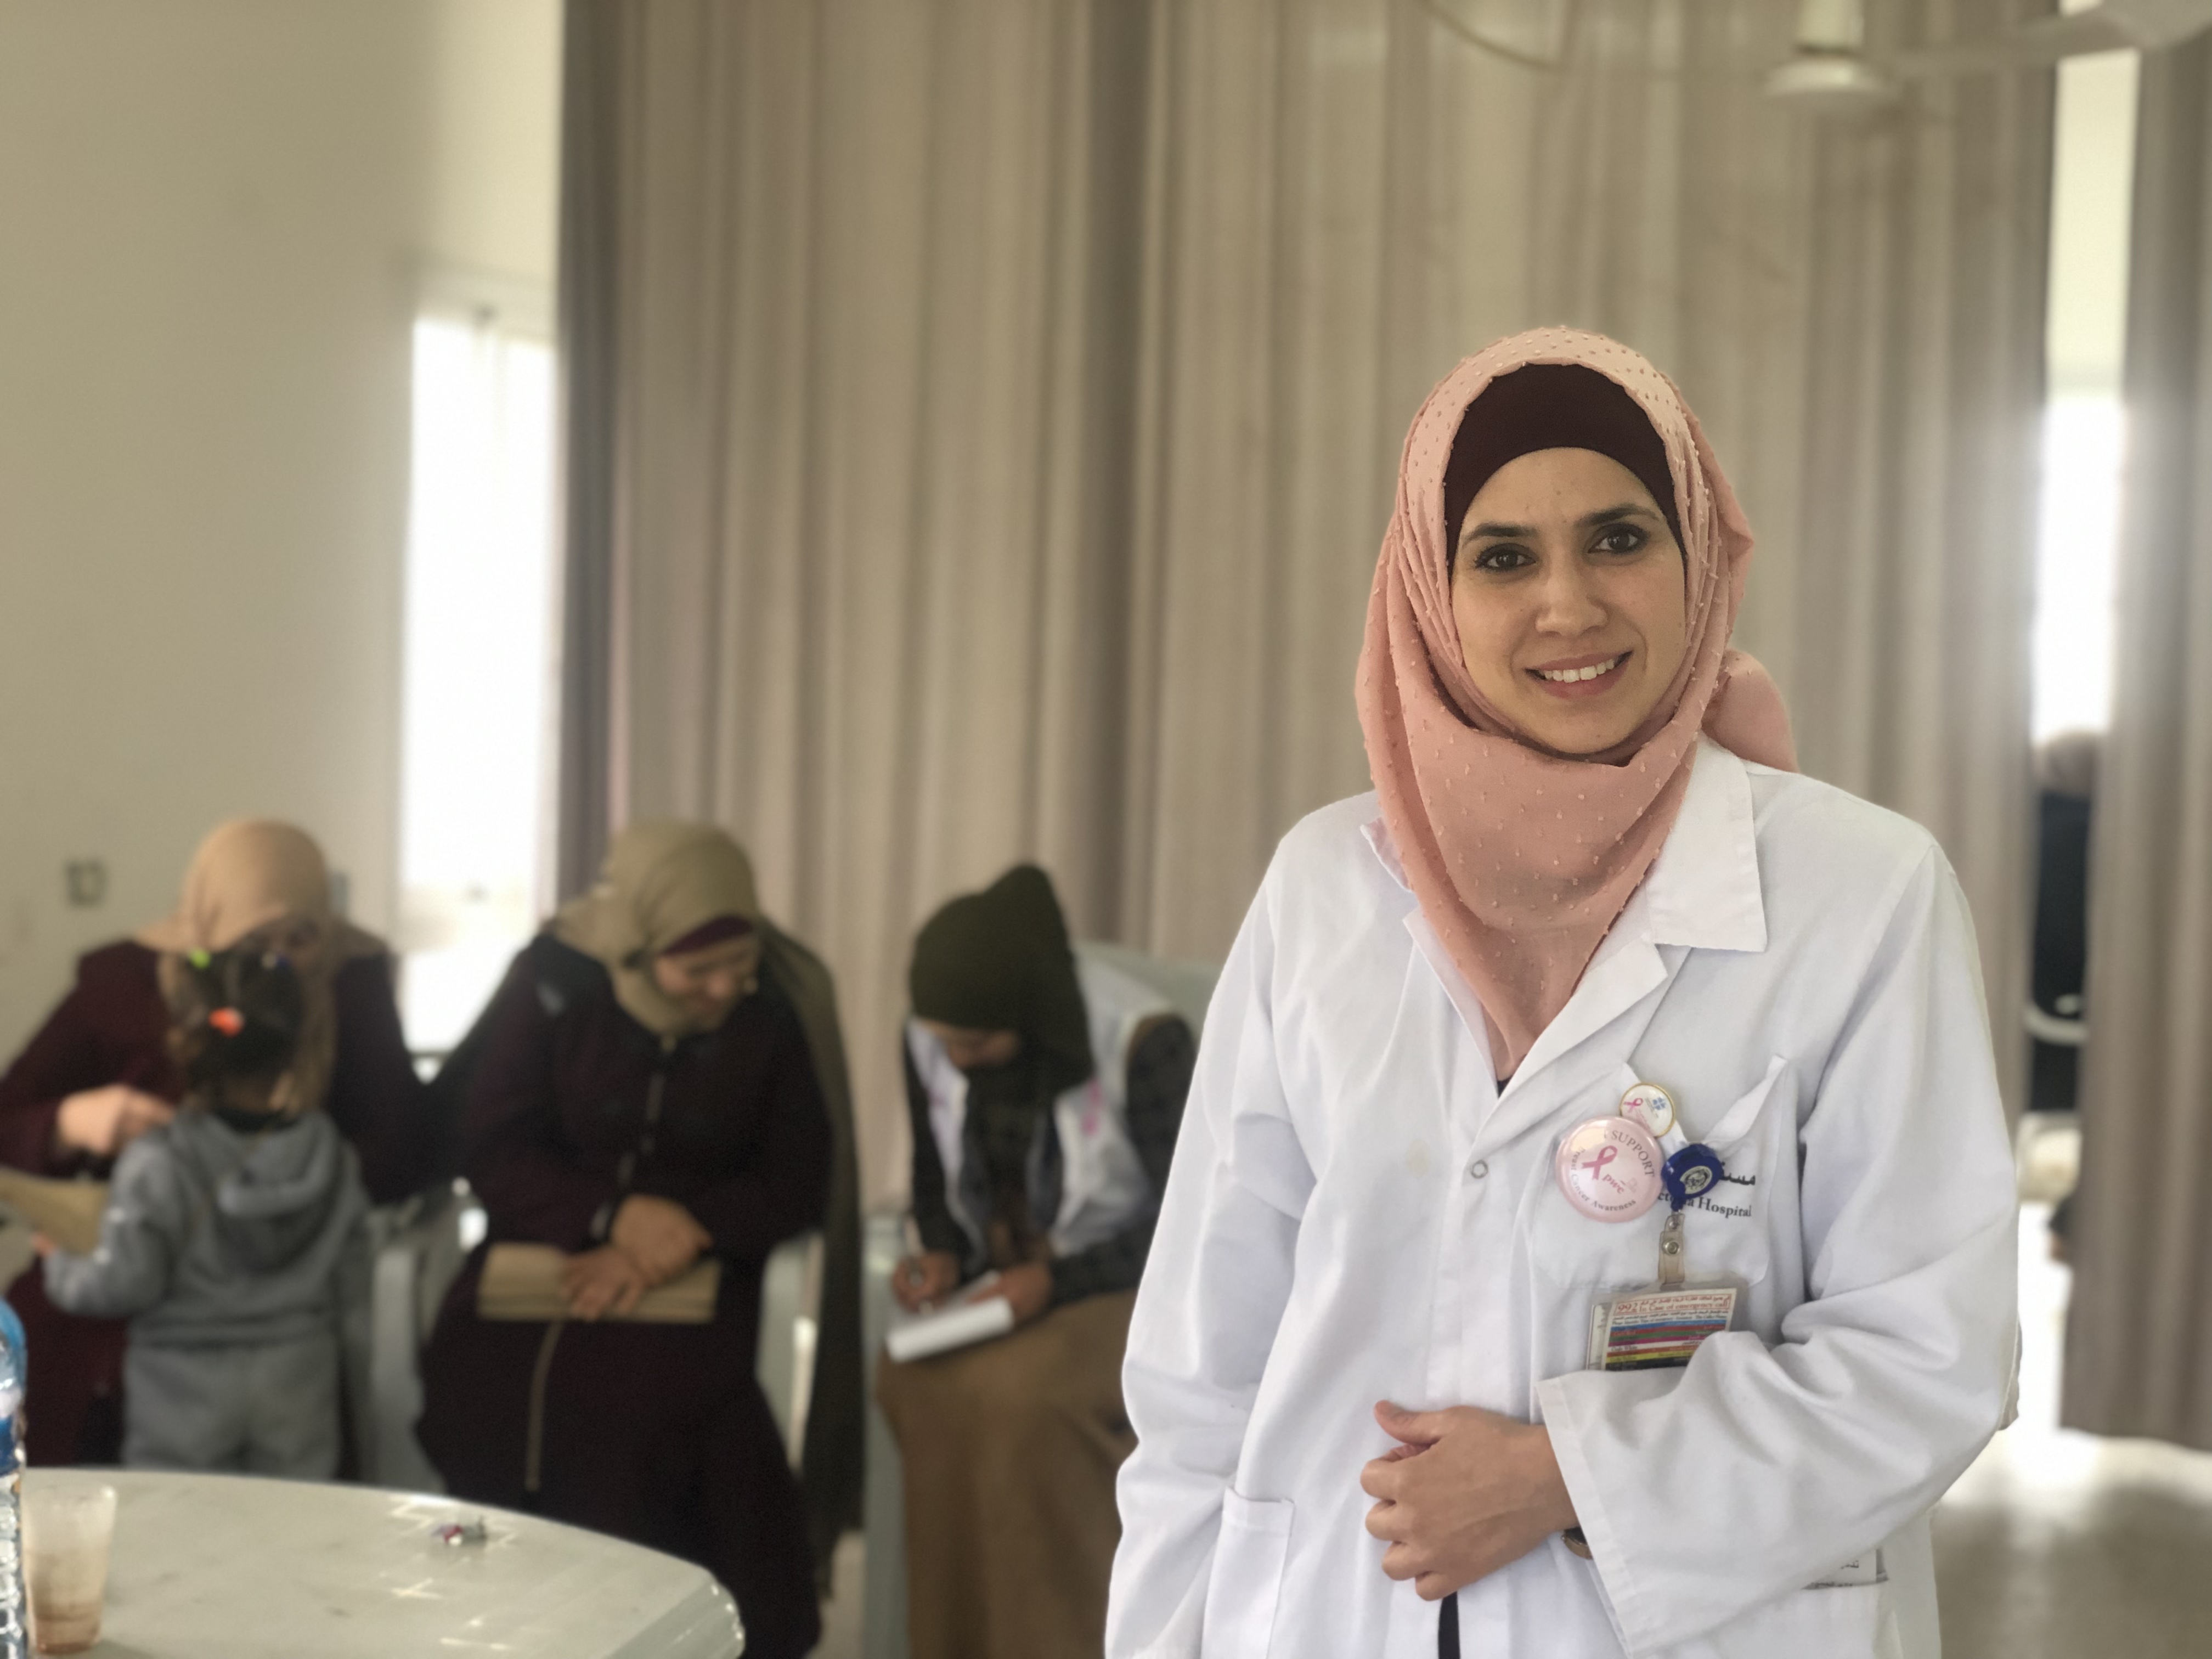 Mobile clinic brings mammography services to remote communities in the West Bank